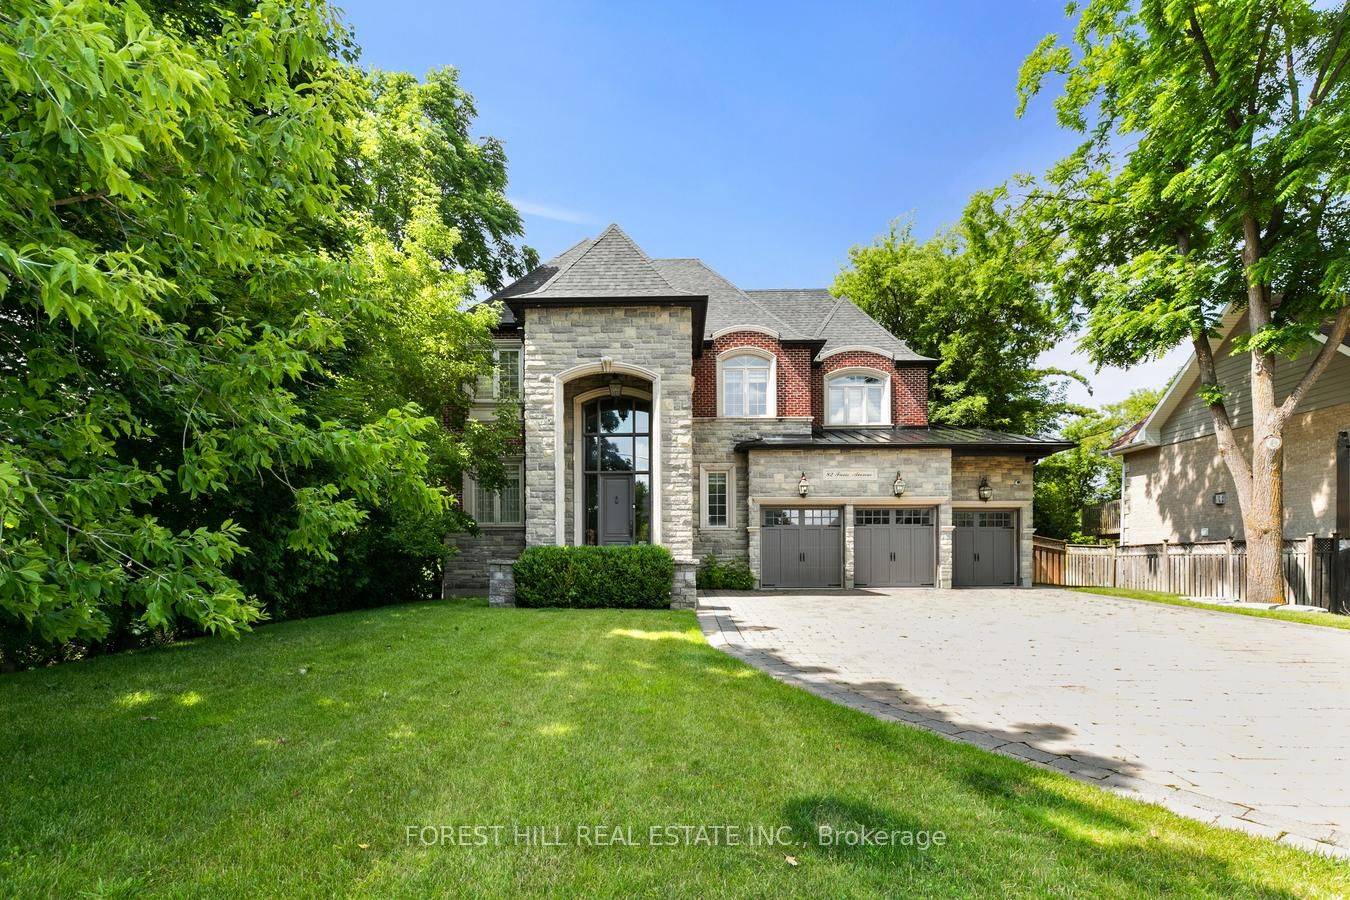 Step Into This Stunning Custom Built Residence, Positioned On A 75x200ft Premium Lot.